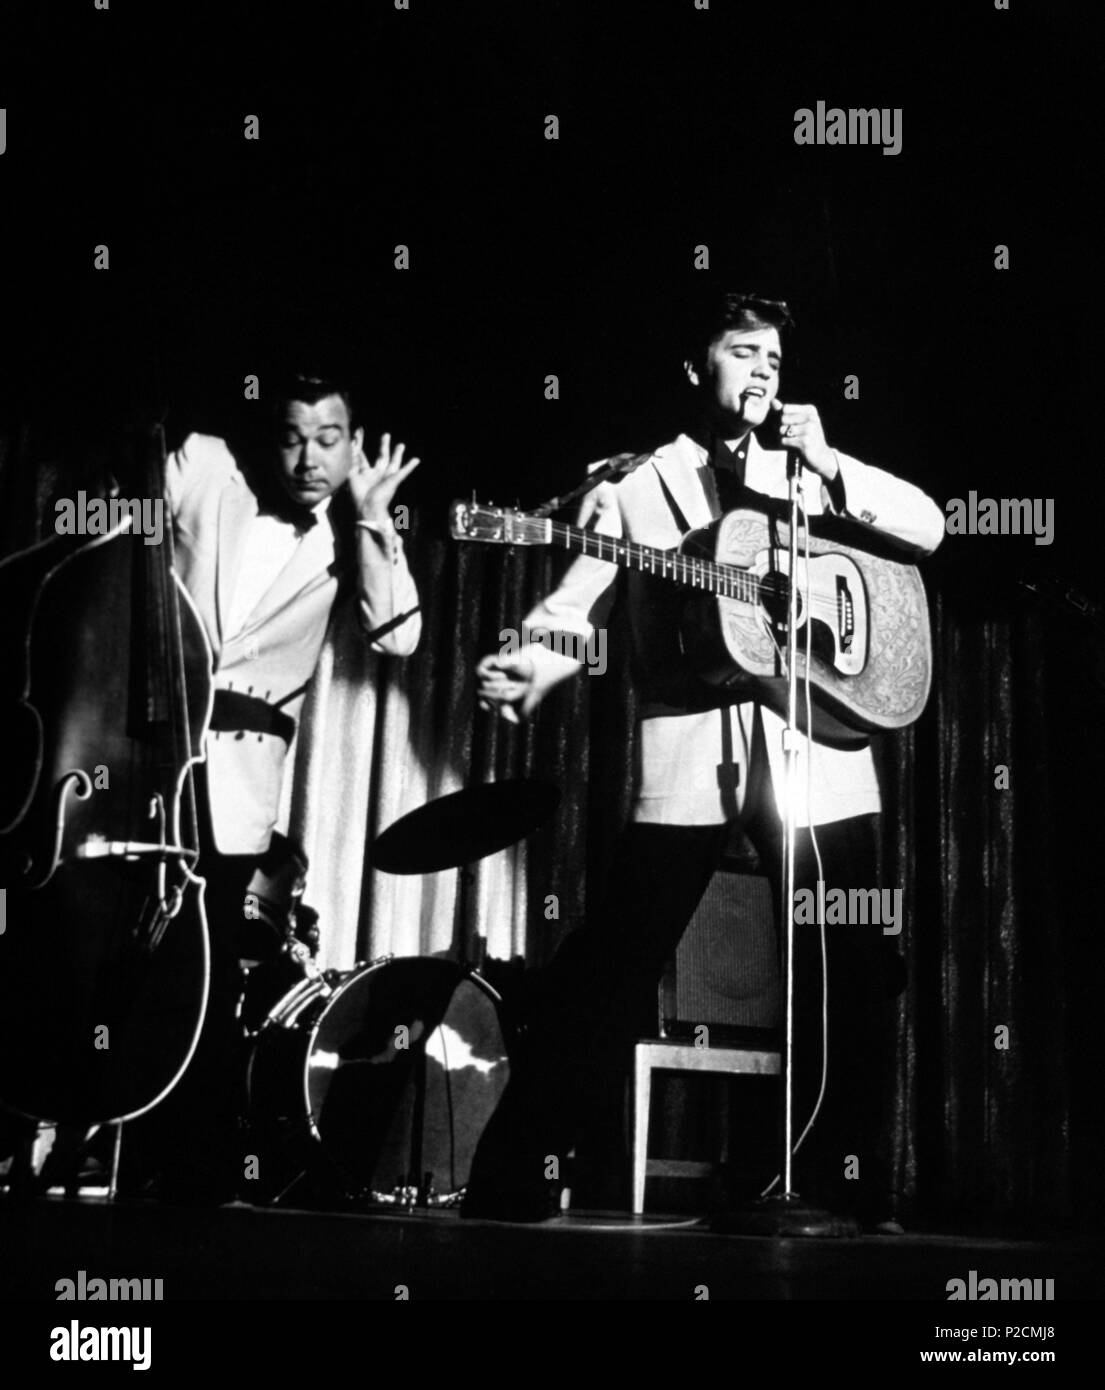 The American singer Elvis Presley performing with his bassist, Bill Black, during the 50's. Stock Photo